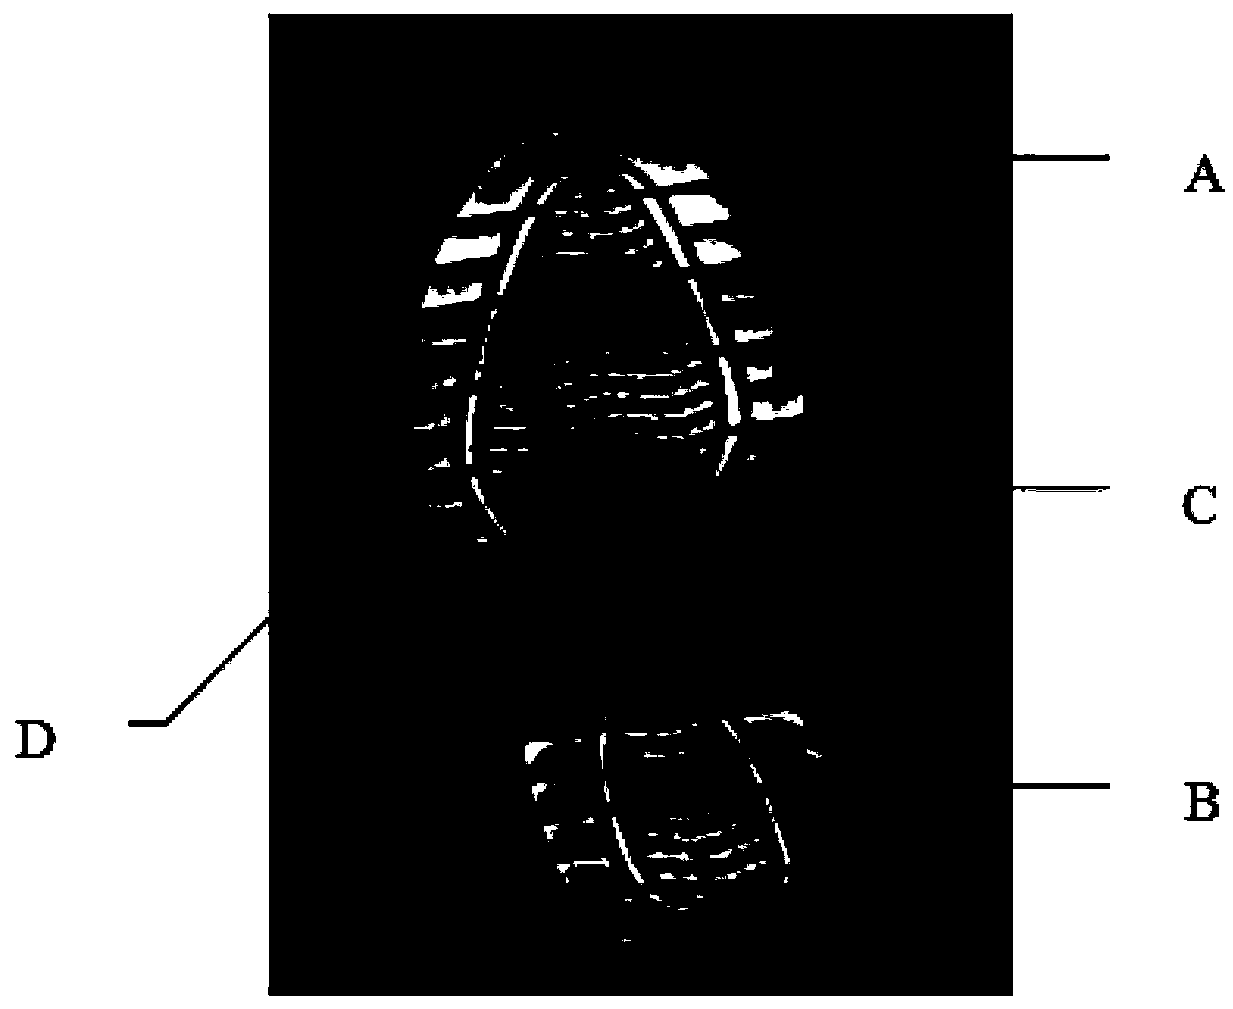 A shoe sample and footprint key point detection method based on depth learning